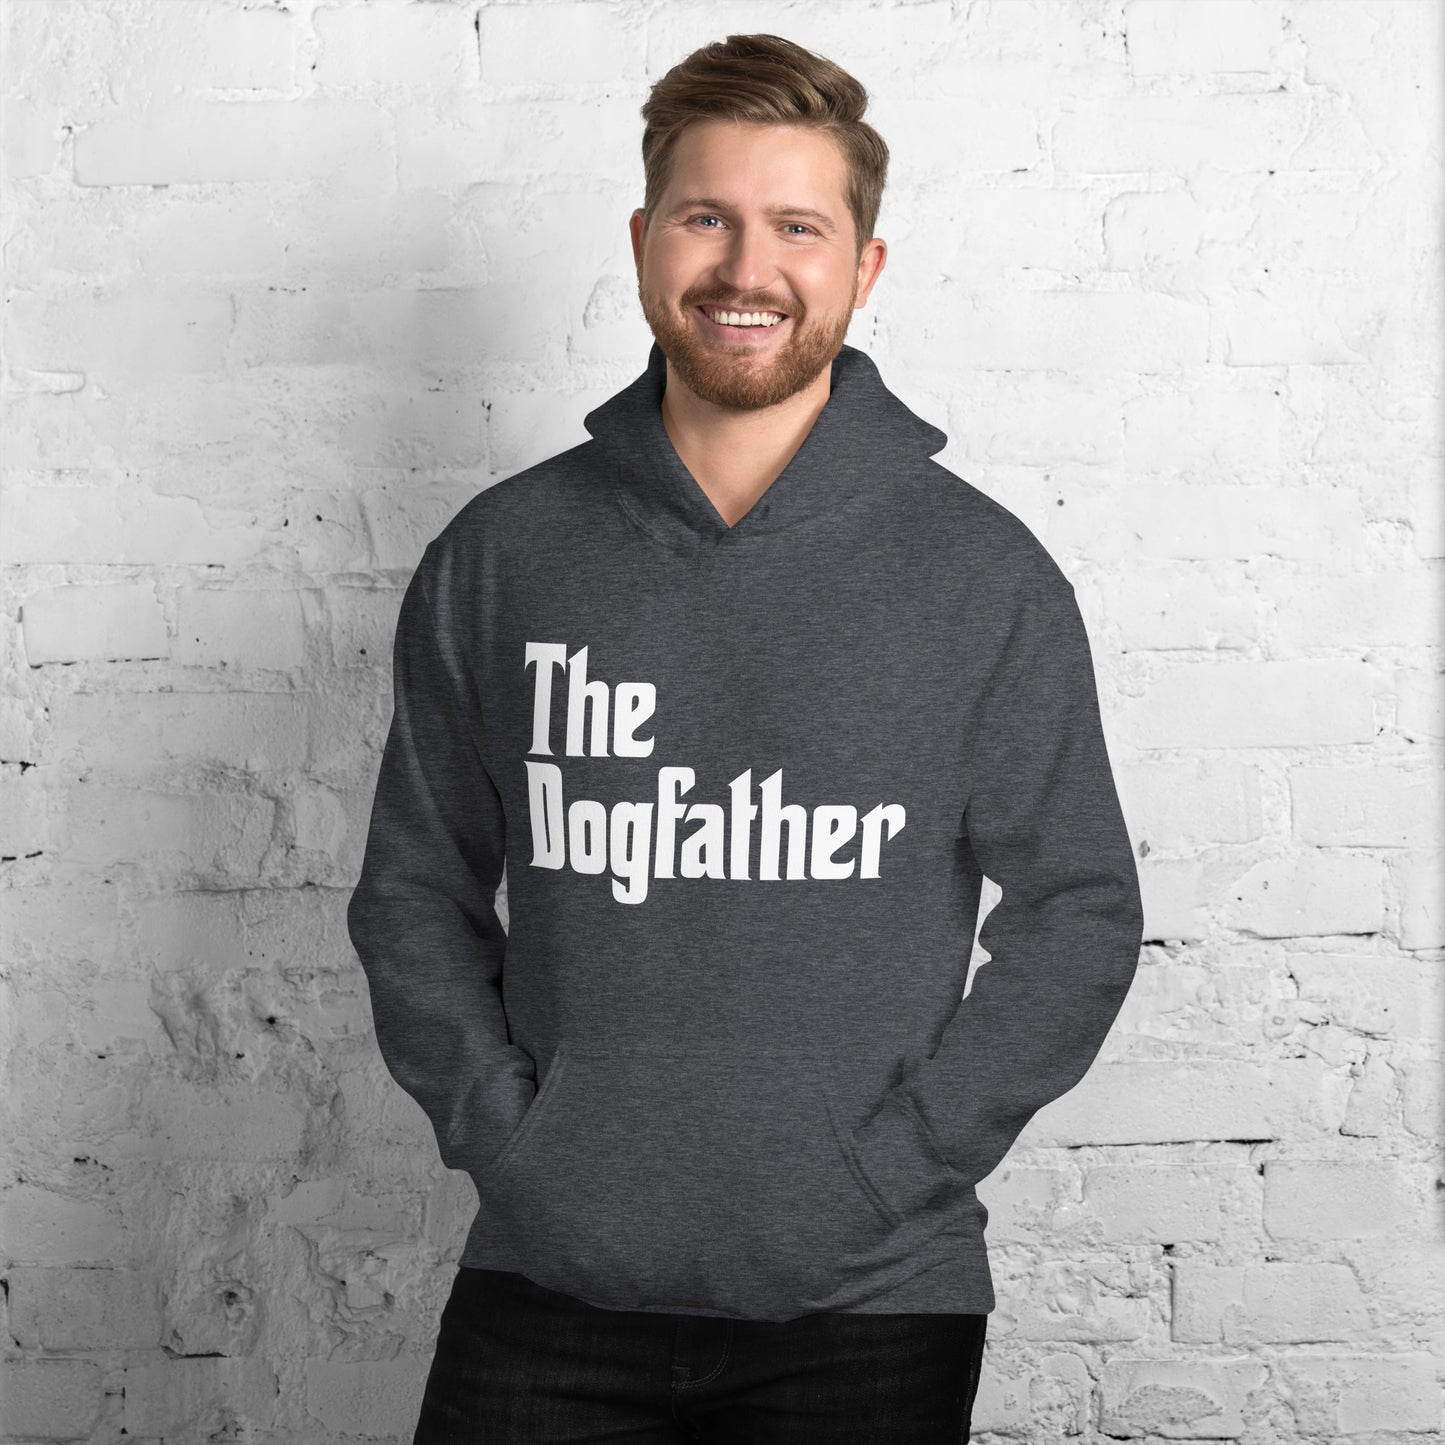 The Dogfather Hoodie